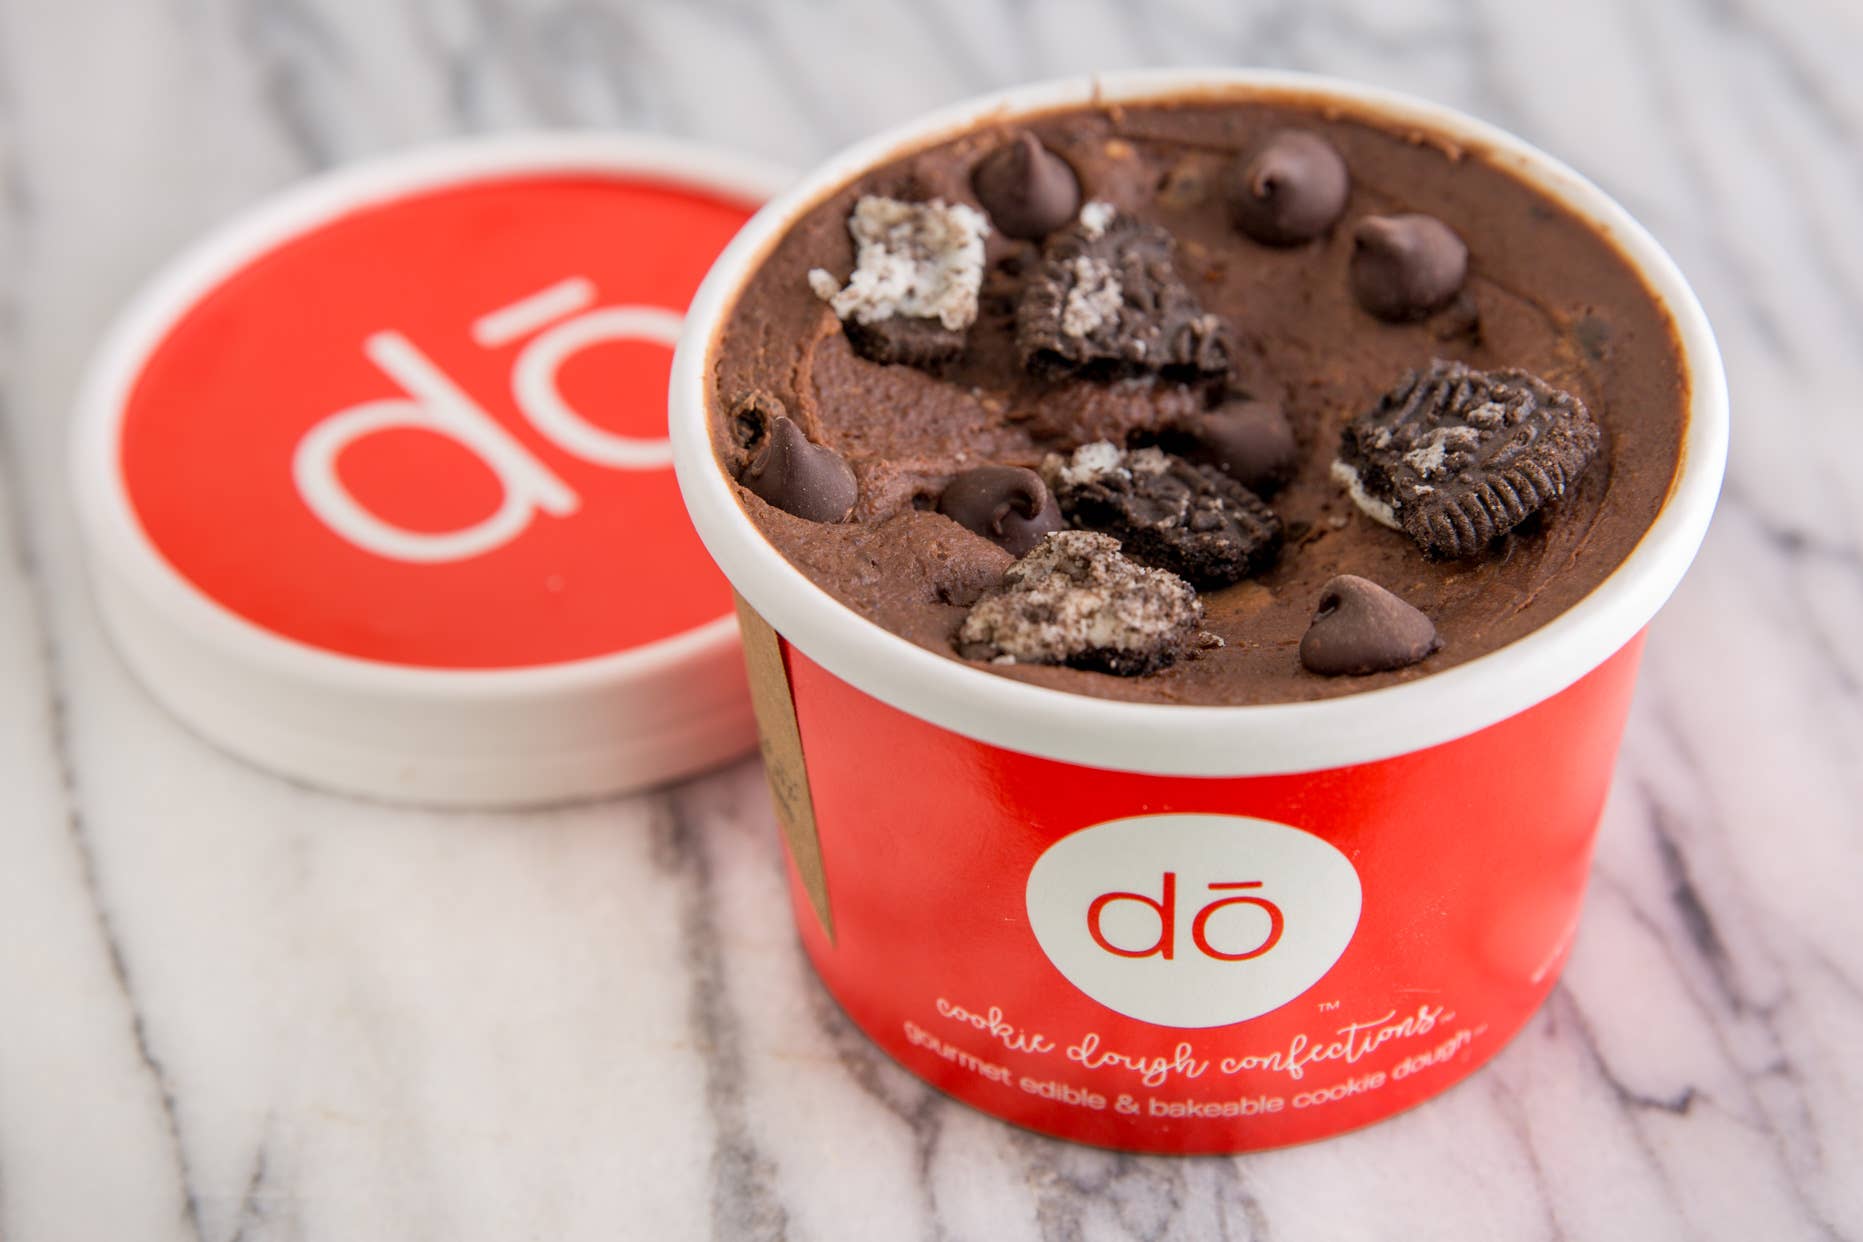 Chocolate Dream Edible Cookie Dough (requires refrigeration)